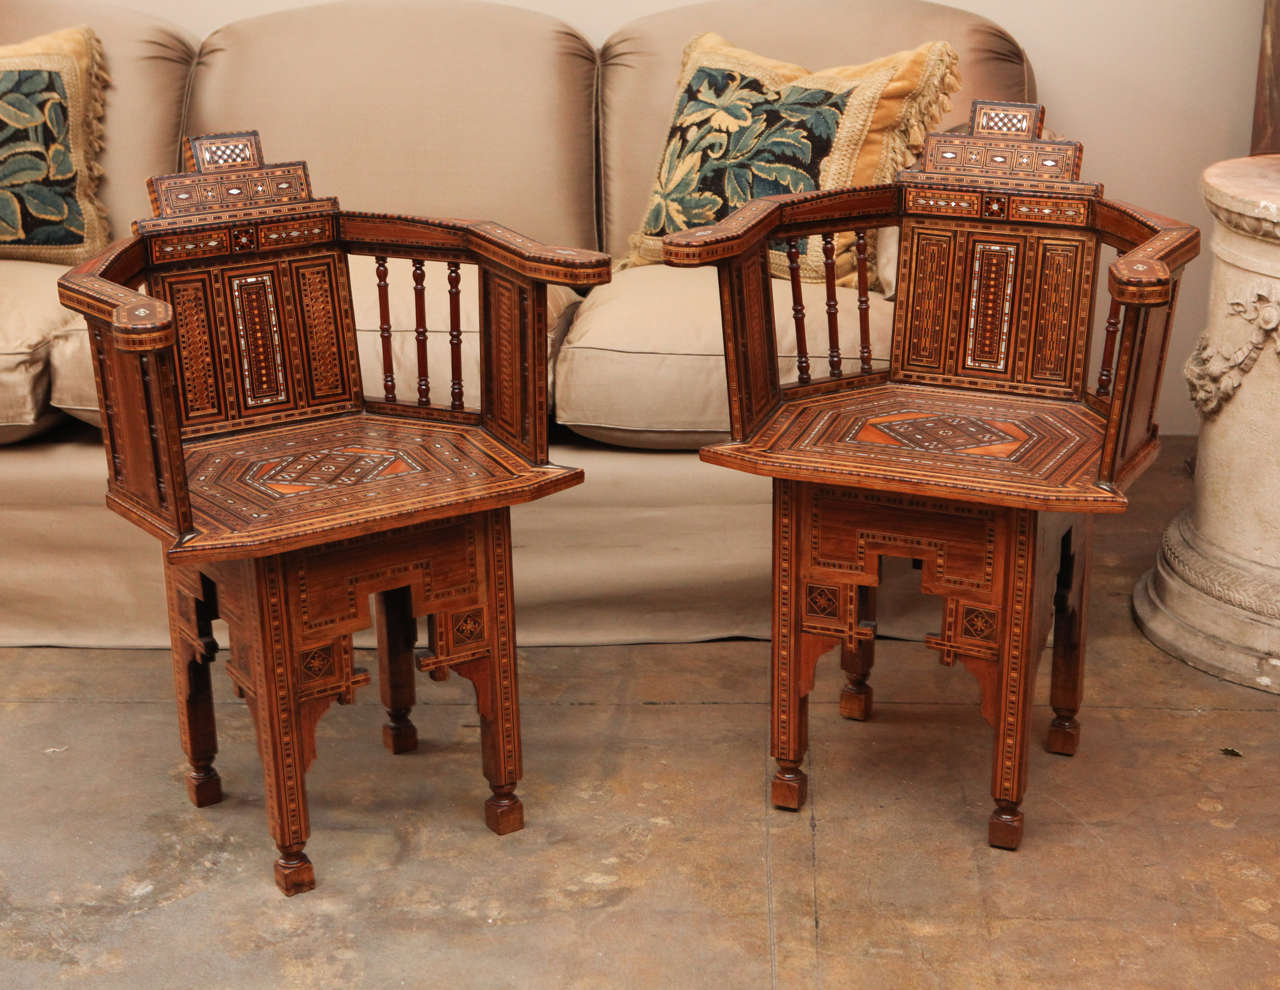 Pair of Moroccan chairs that are elaborately decorated with mother-of-pearl inlays.